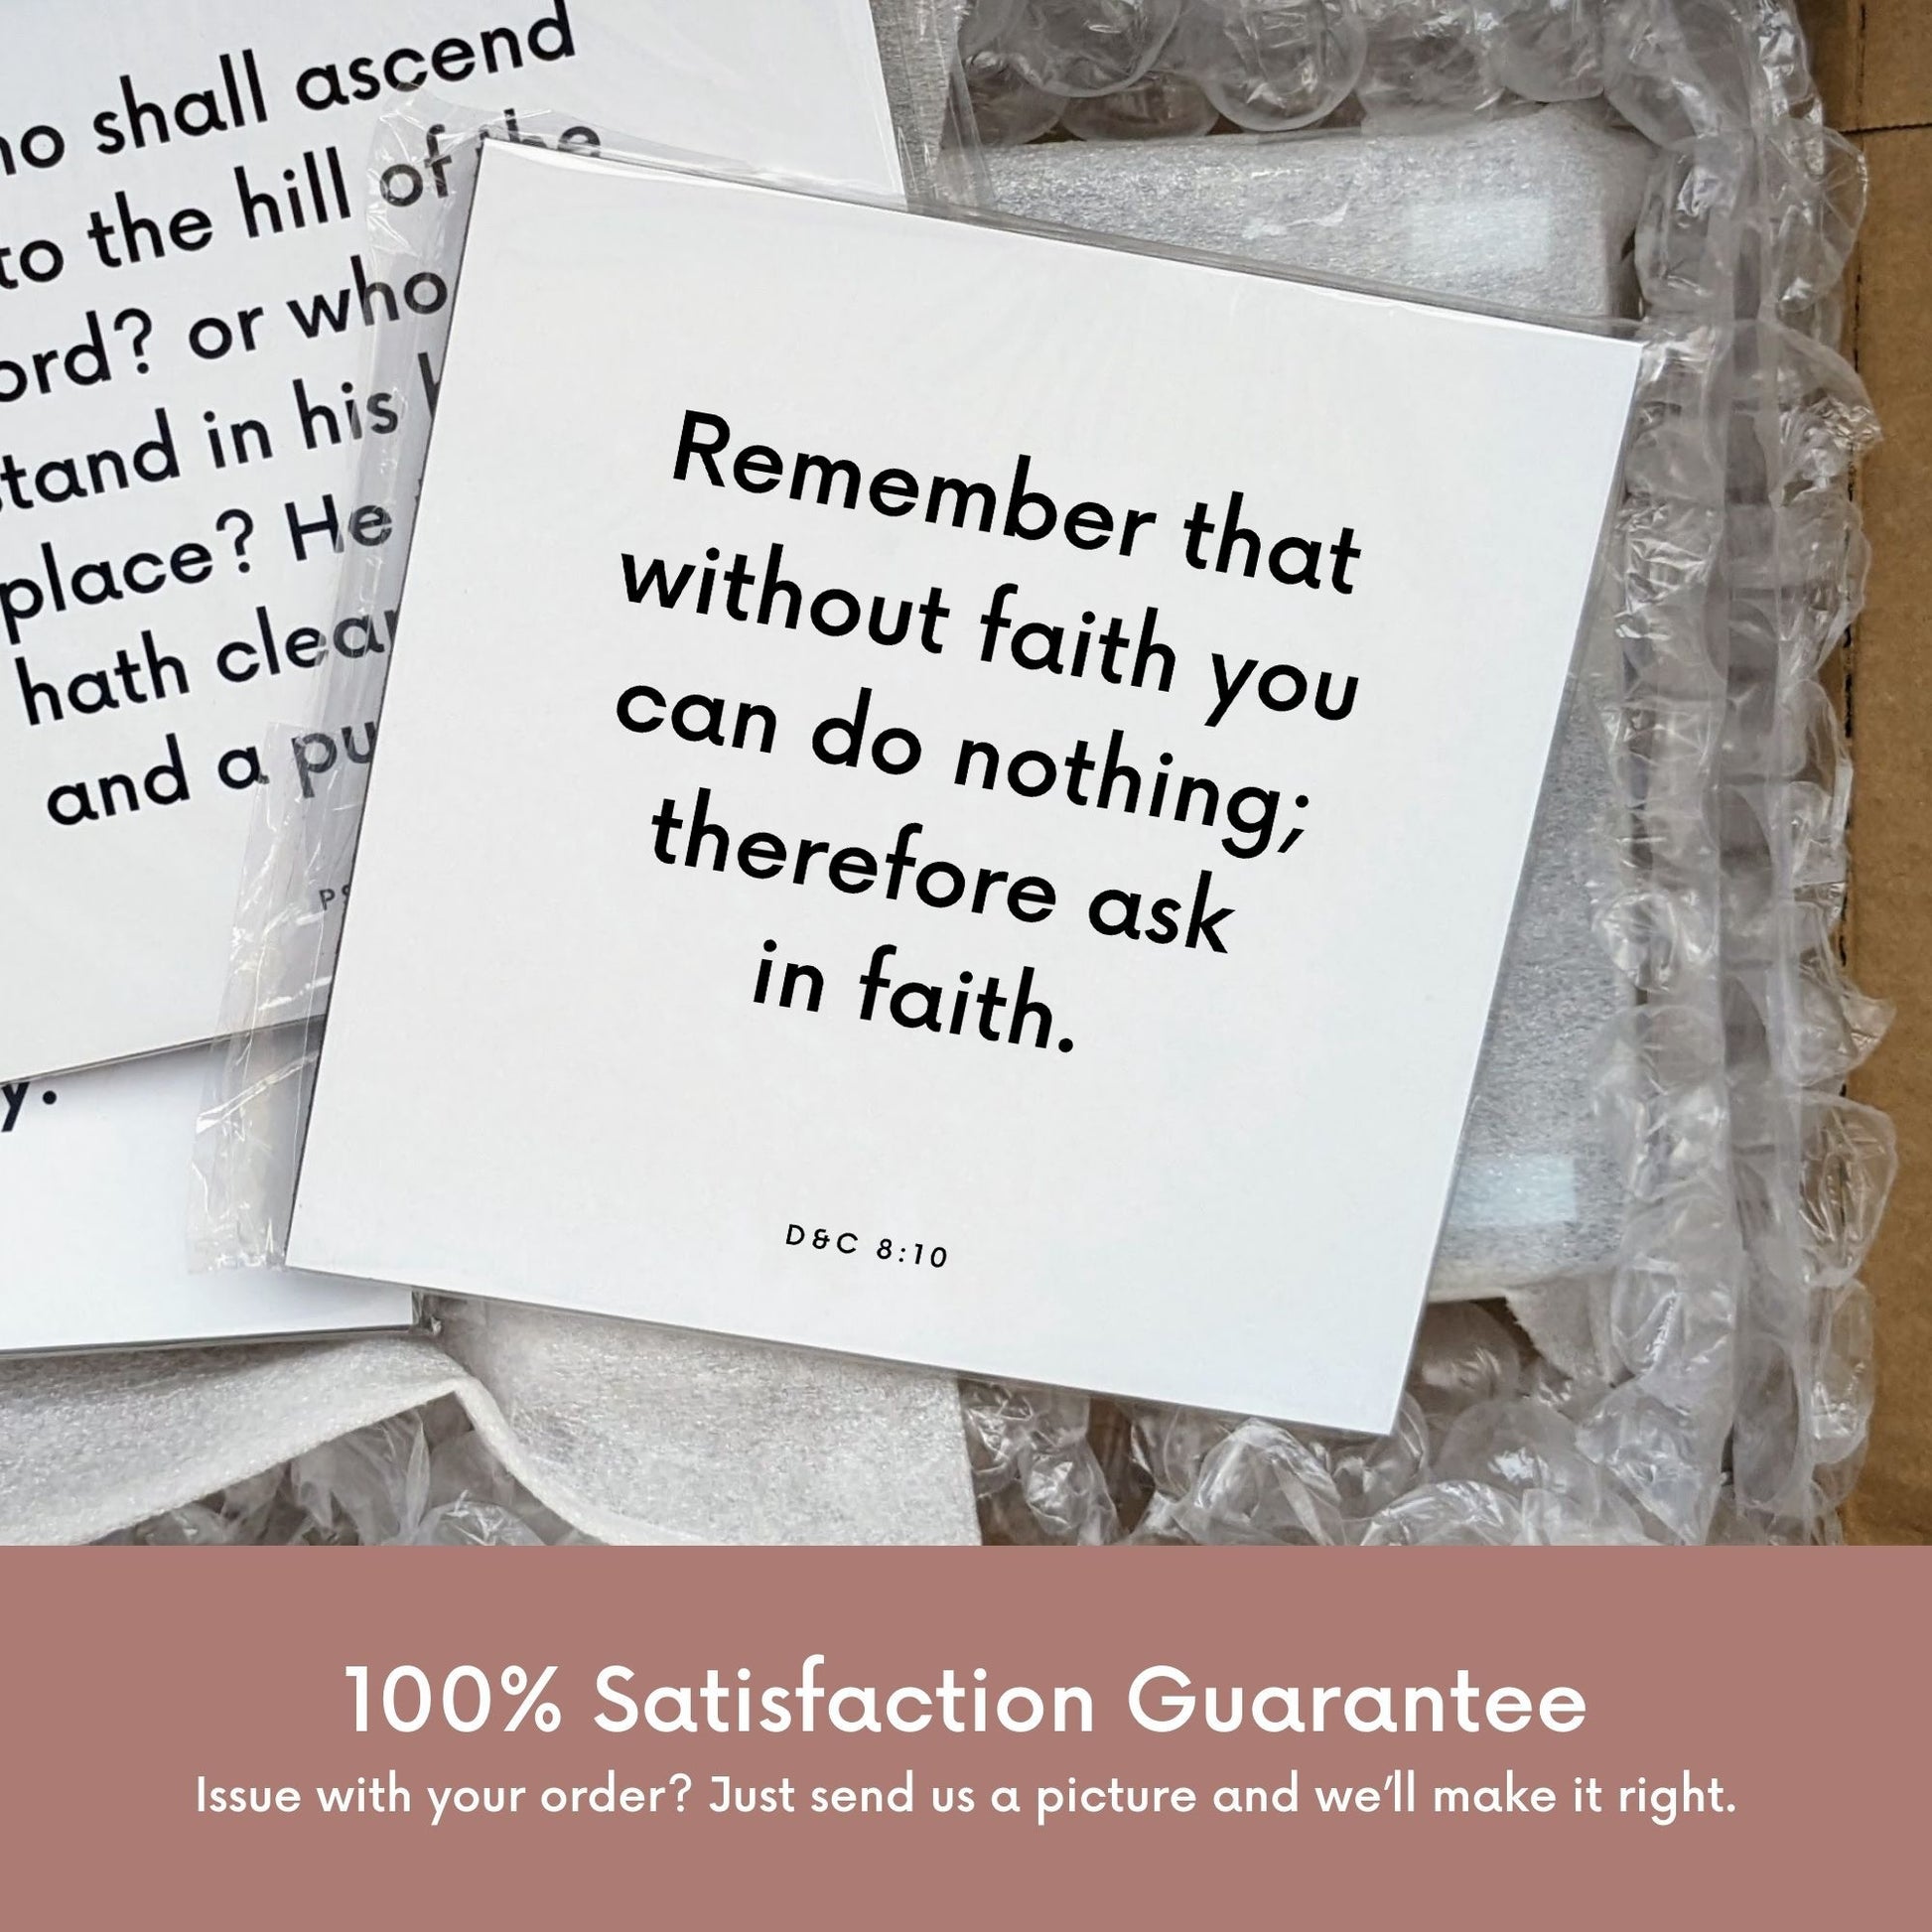 Shipping materials for scripture tile of D&C 8:10 - "Remember that without faith you can do nothing"